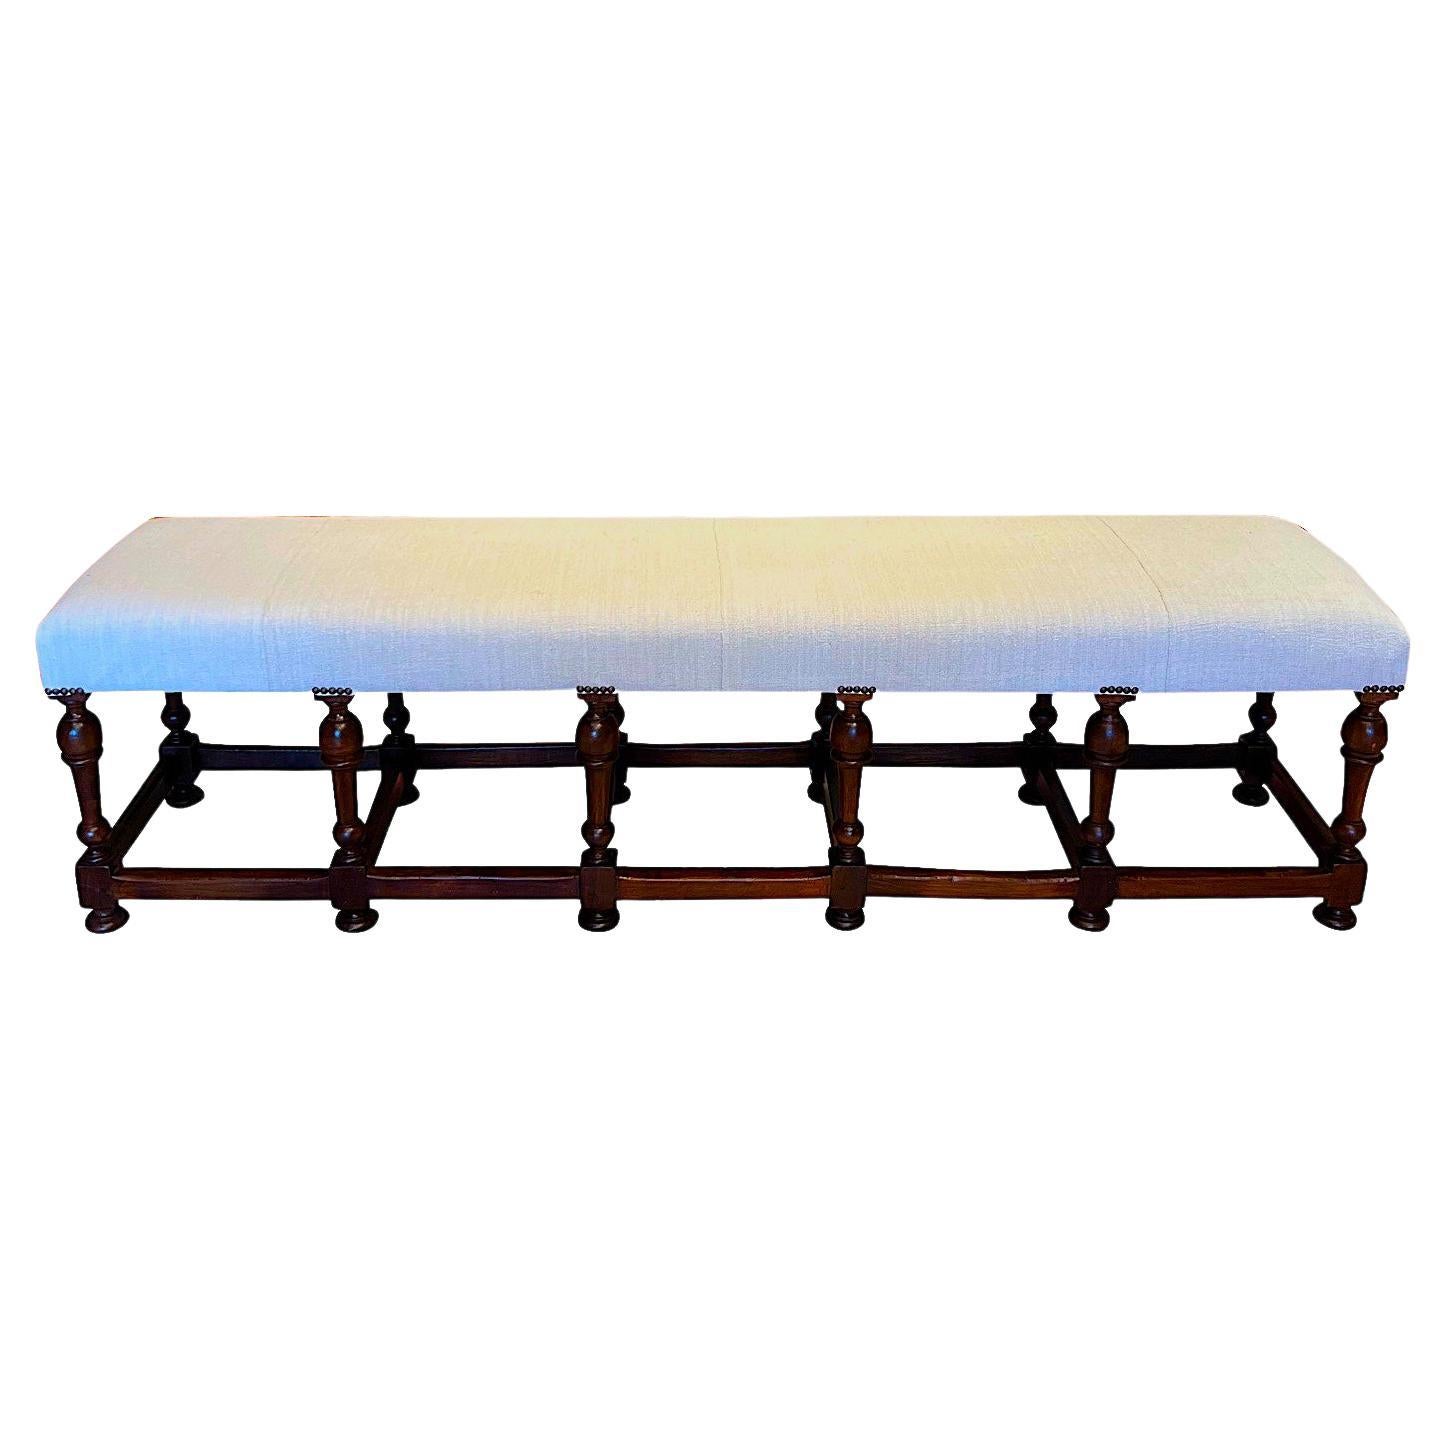 19th century Italian extra long bench with twelve turned legs. 
Legs are connected by straight wood stretchers.
Newly reupholstered in vintage hand spun Belgian linen.